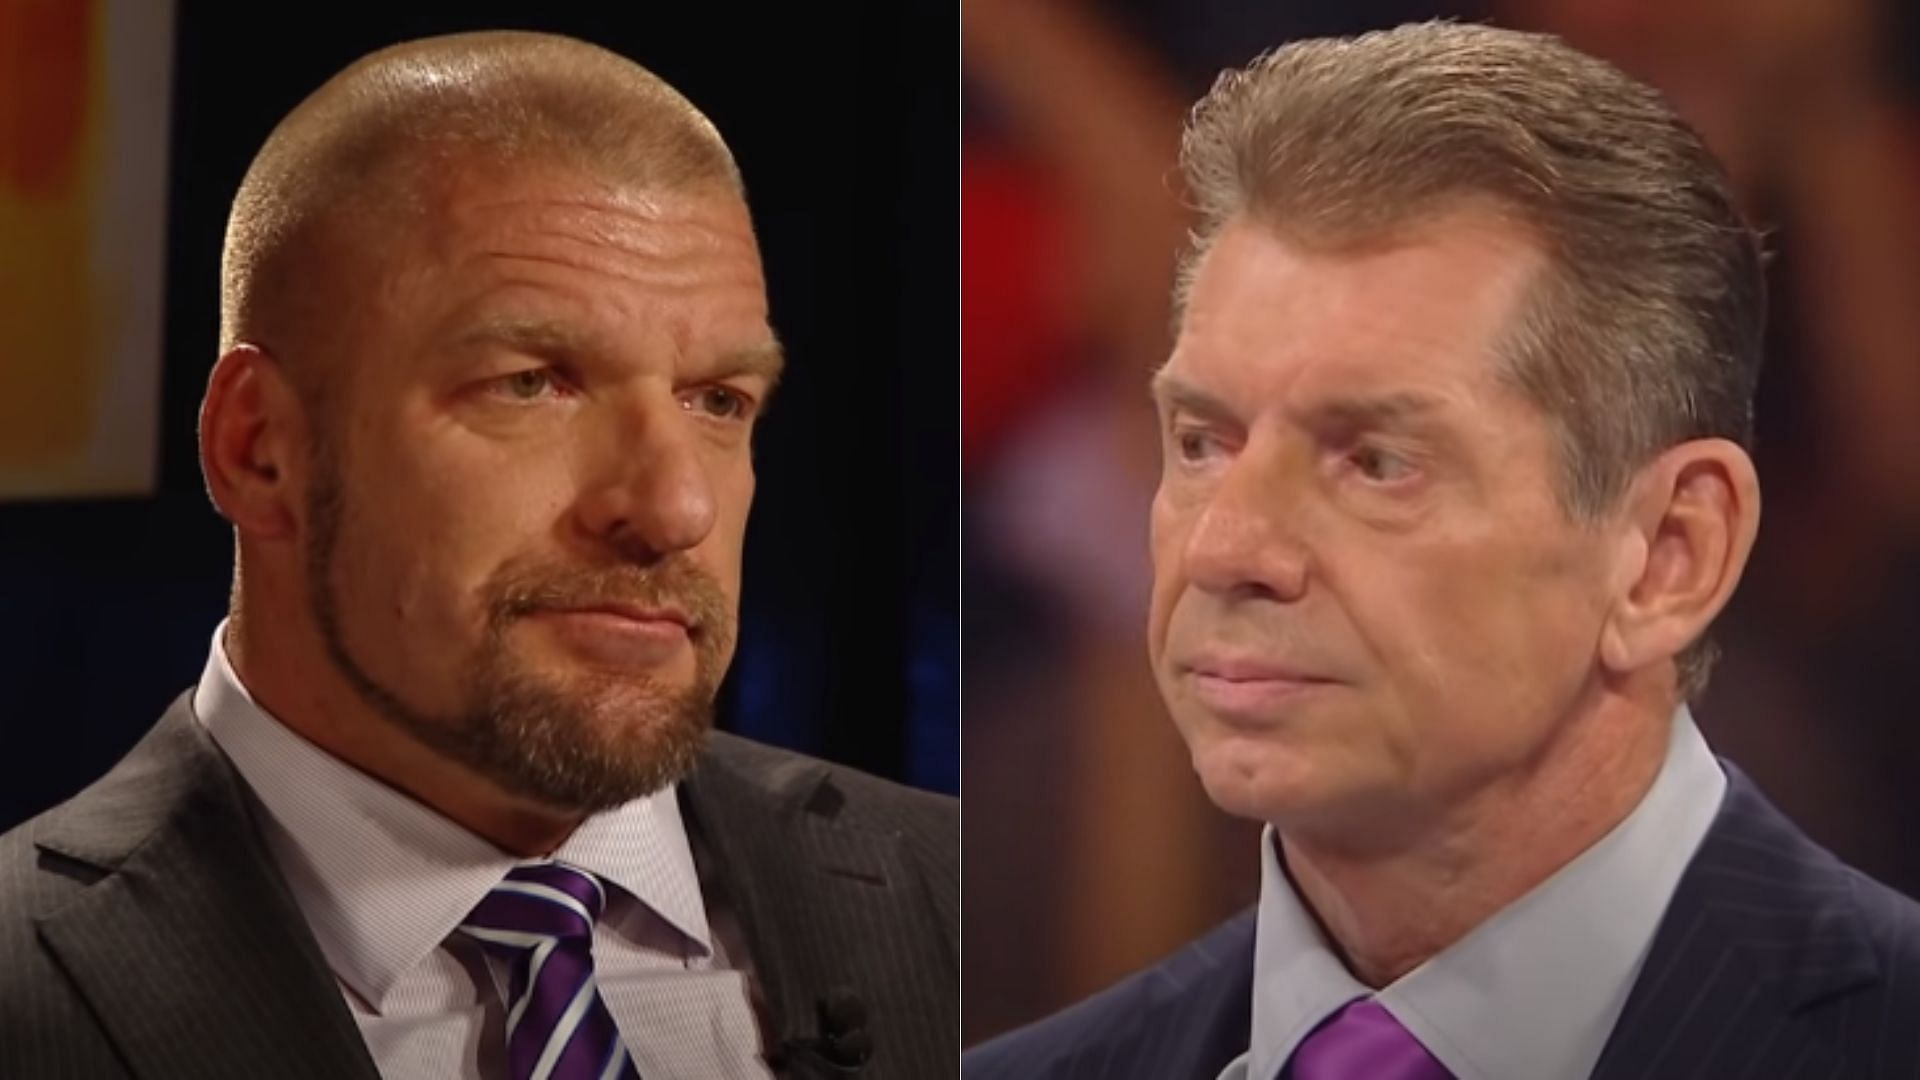 NXT founder Triple H (left); WWE Chairman Vince McMahon (right)